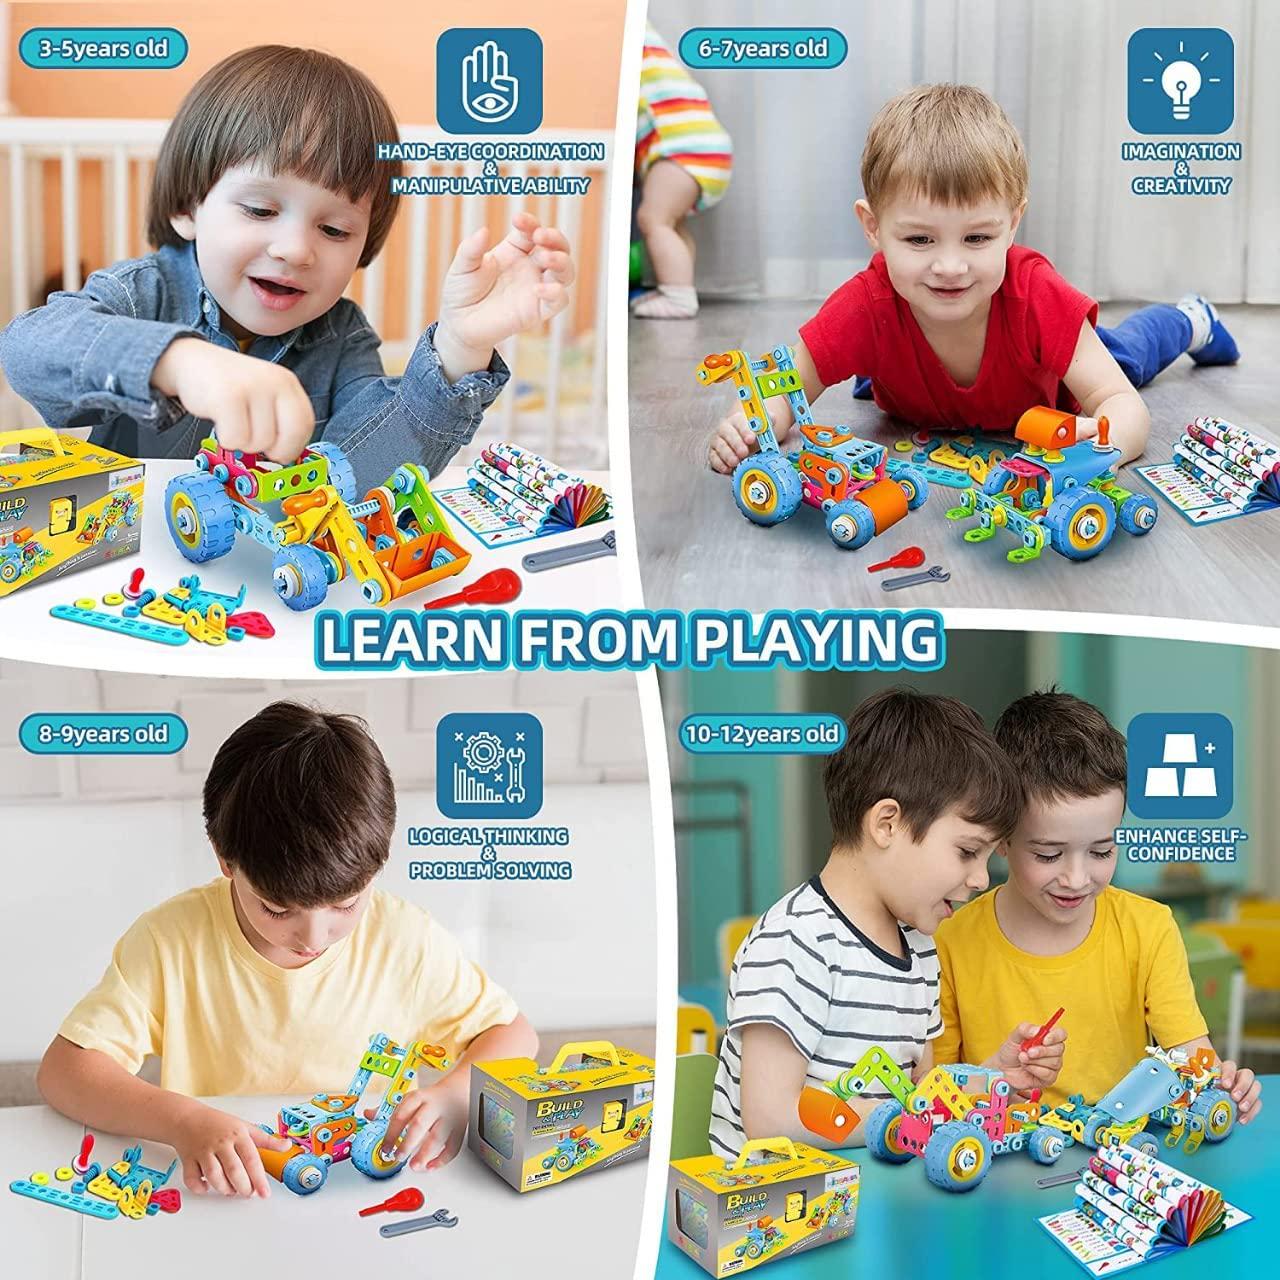 KIDSAVIA, KIDSAVIA Â - STEM Toys - Learning Toys 6 in 1 DIY Building and Construction Toys - Engineering Building Blocks Science Toys, Creative Toys for Kids Ages 6-12 for Boys and Girls Gift